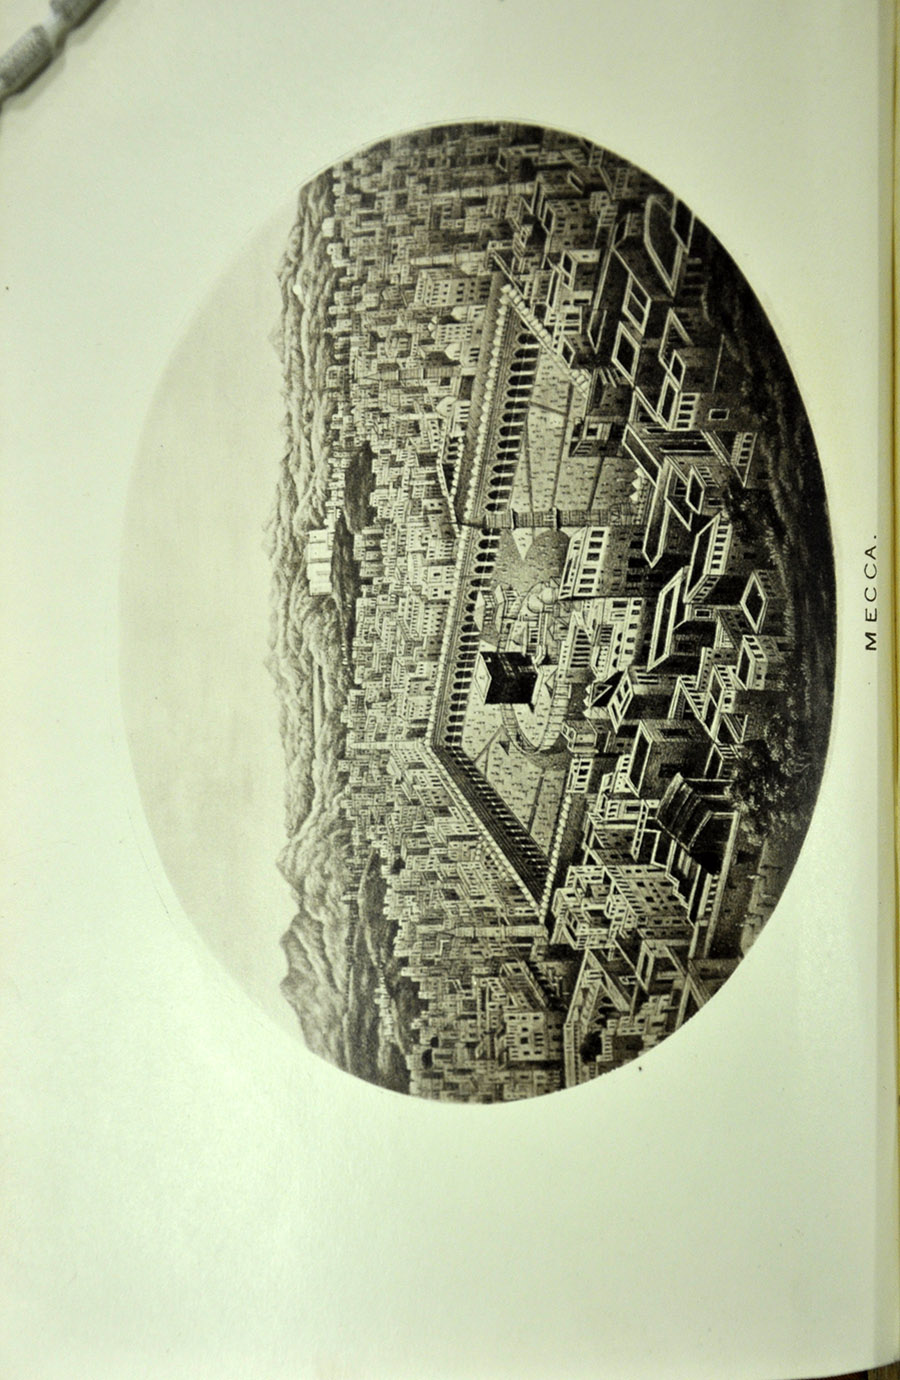 Engraving of Mecca from "Selections from the Kur-an"